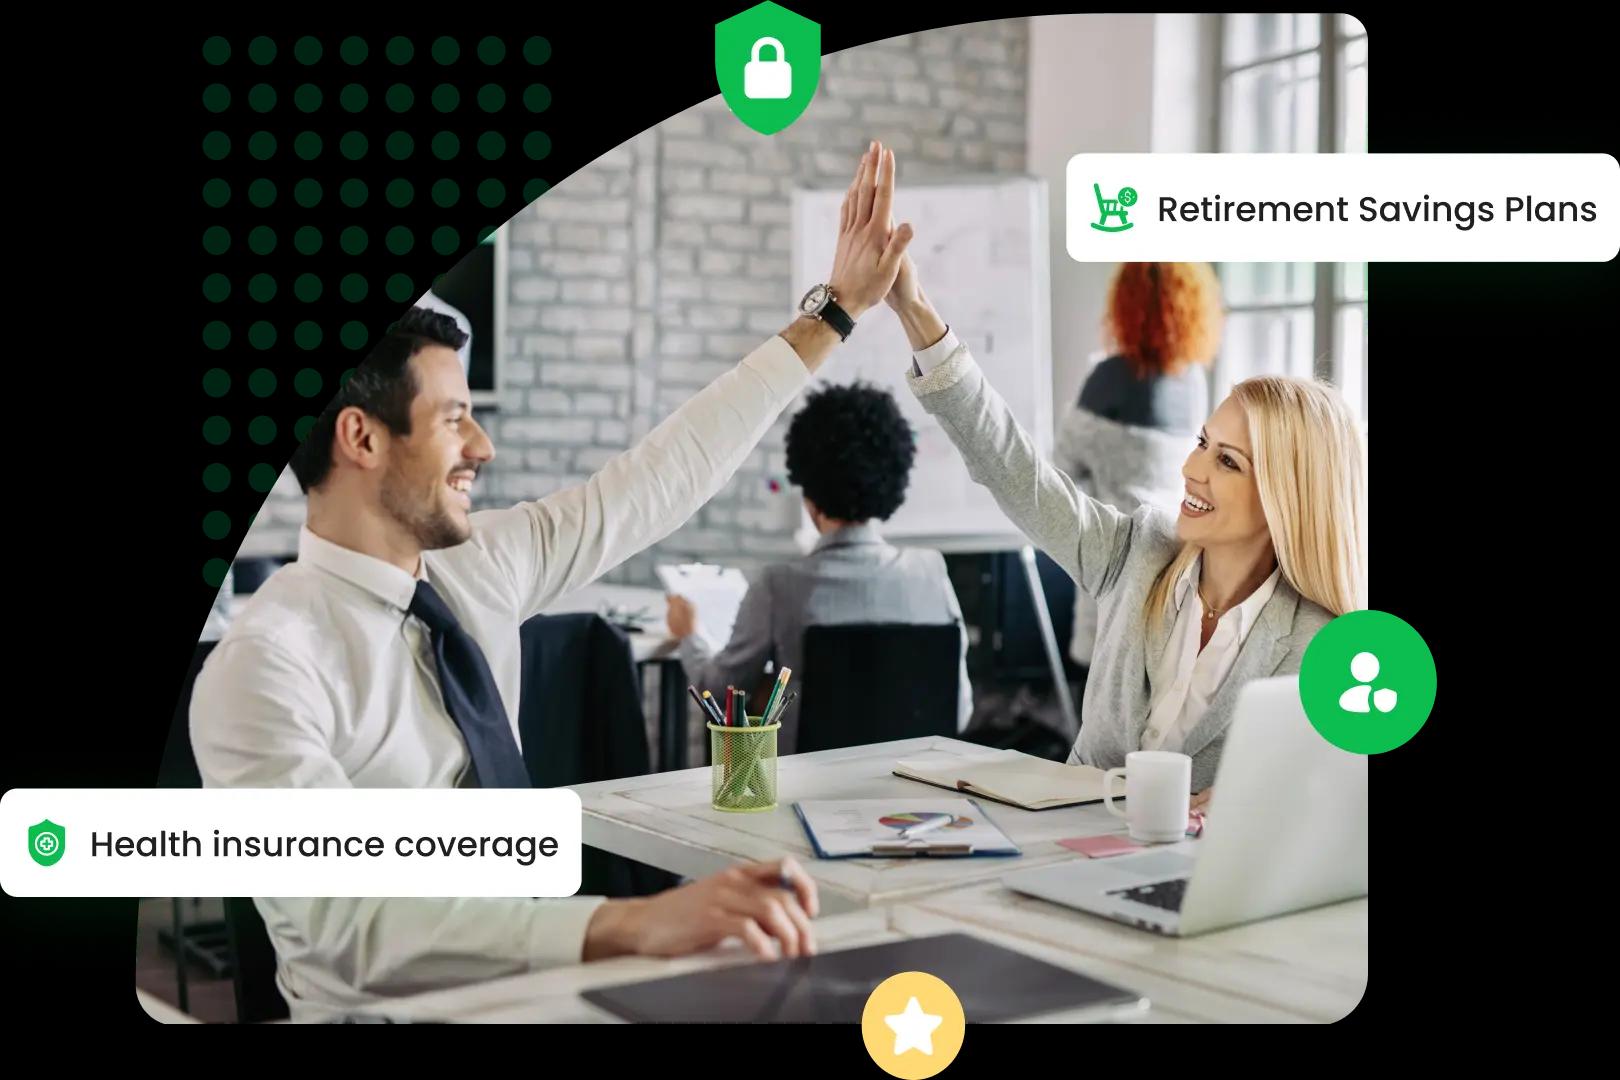 Two professionals high-fiving, representing successful employee health coverage through Mitigata’s employee benefits insurance.